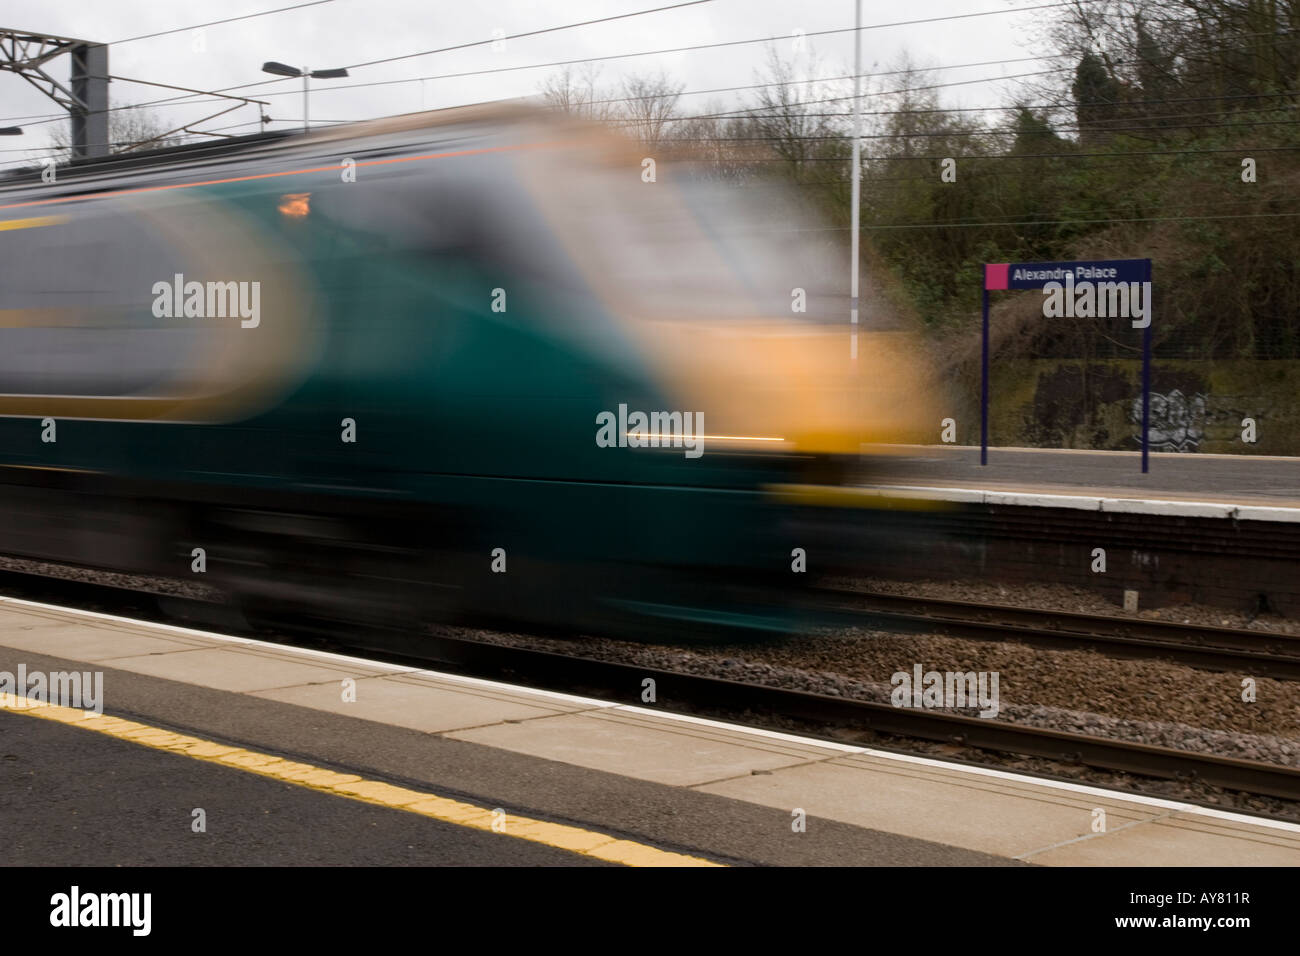 Hull Trains Express Train Passes at speed with motion blur Stock Photo